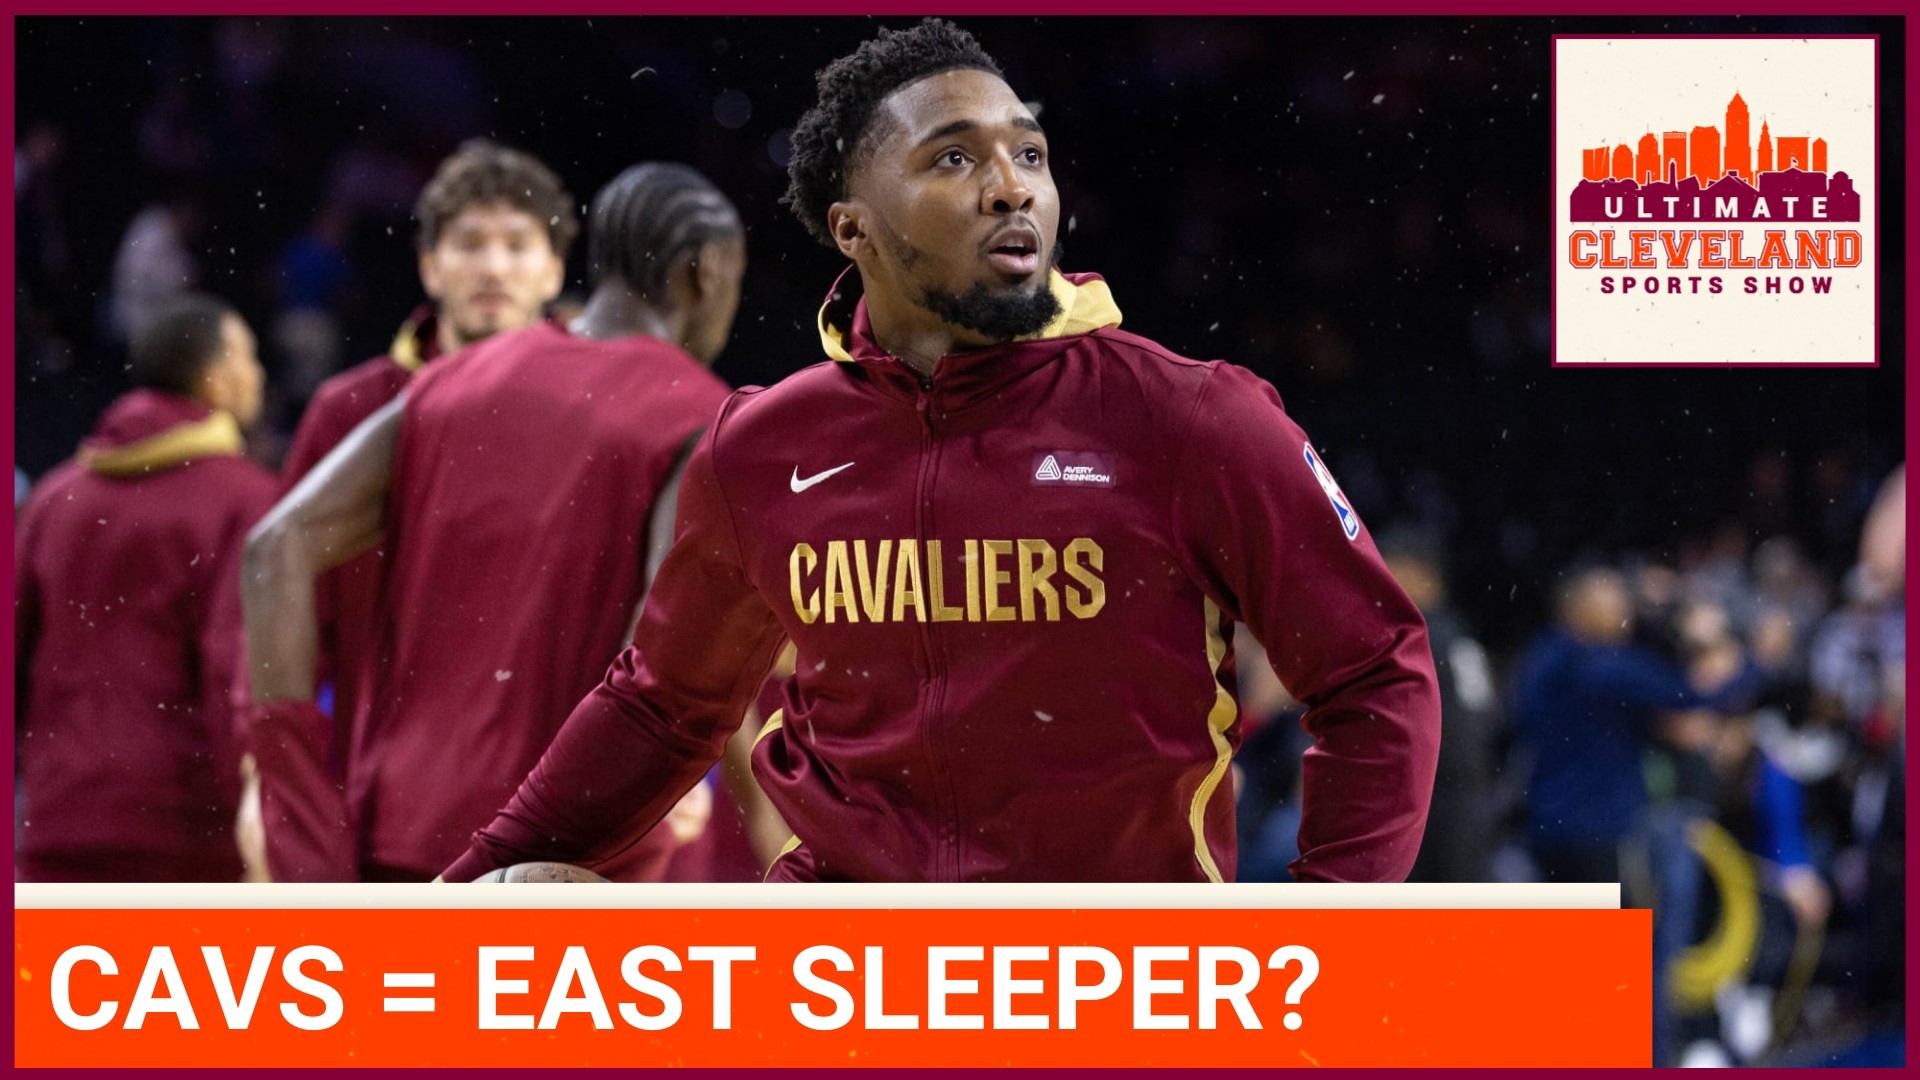 The Cleveland Cavaliers '22-'23 season kicks off Wednesday night against the Toronto Raptors. What are your expectations for the team this year?